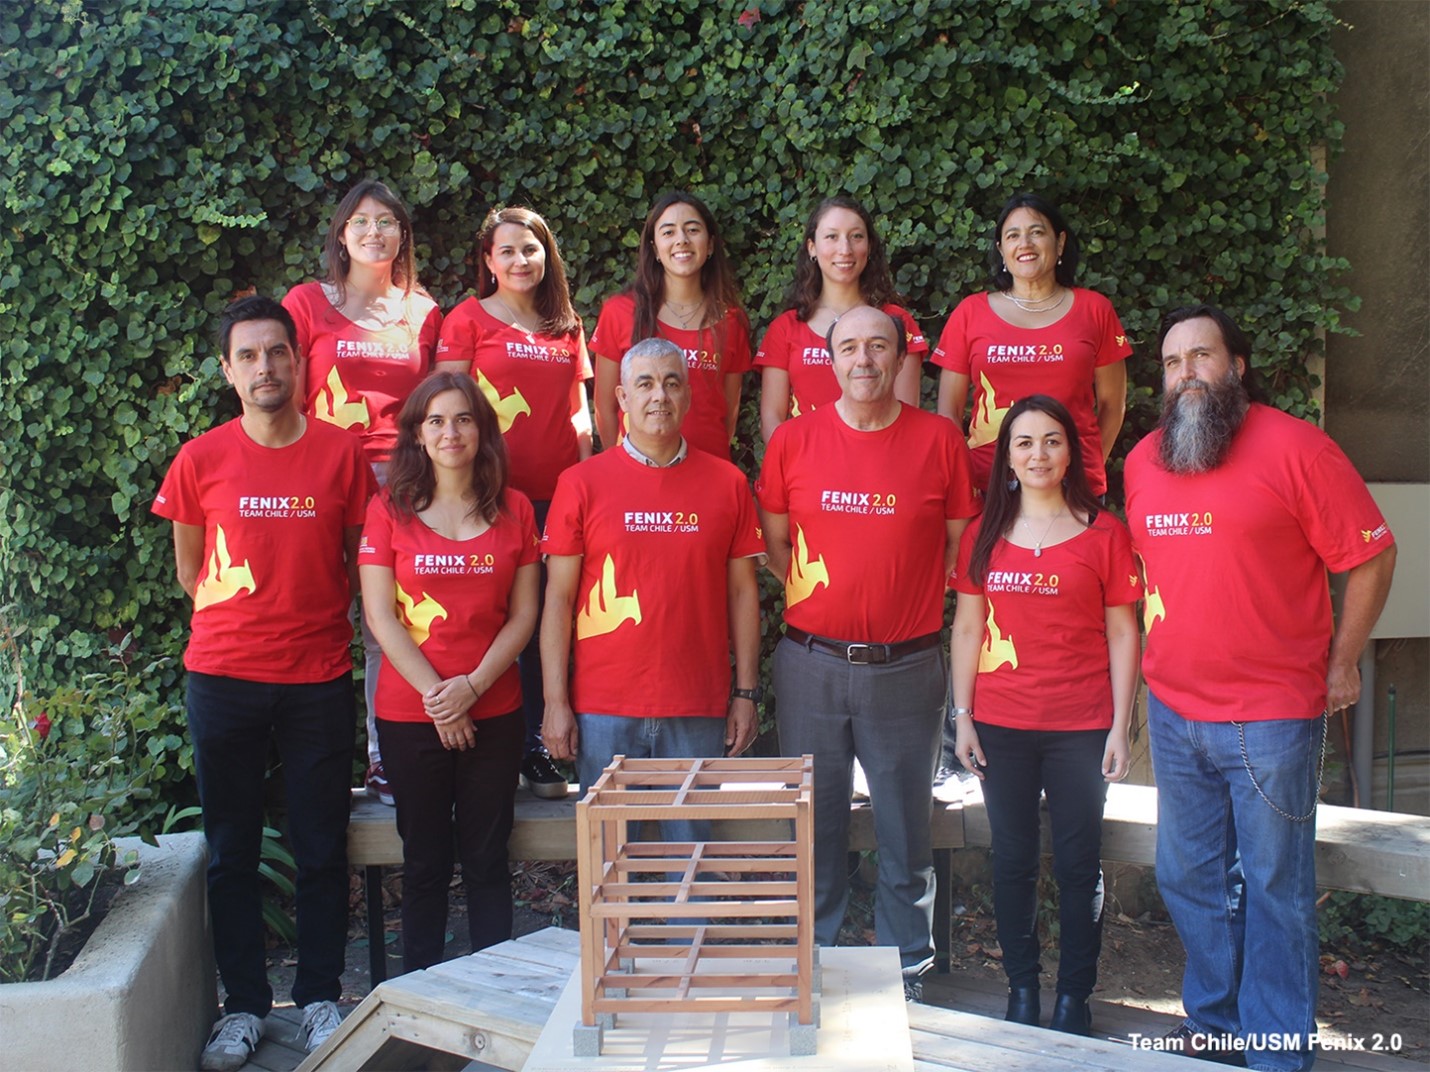 Group photo of the team chile members for Solar Decathlon 2020.